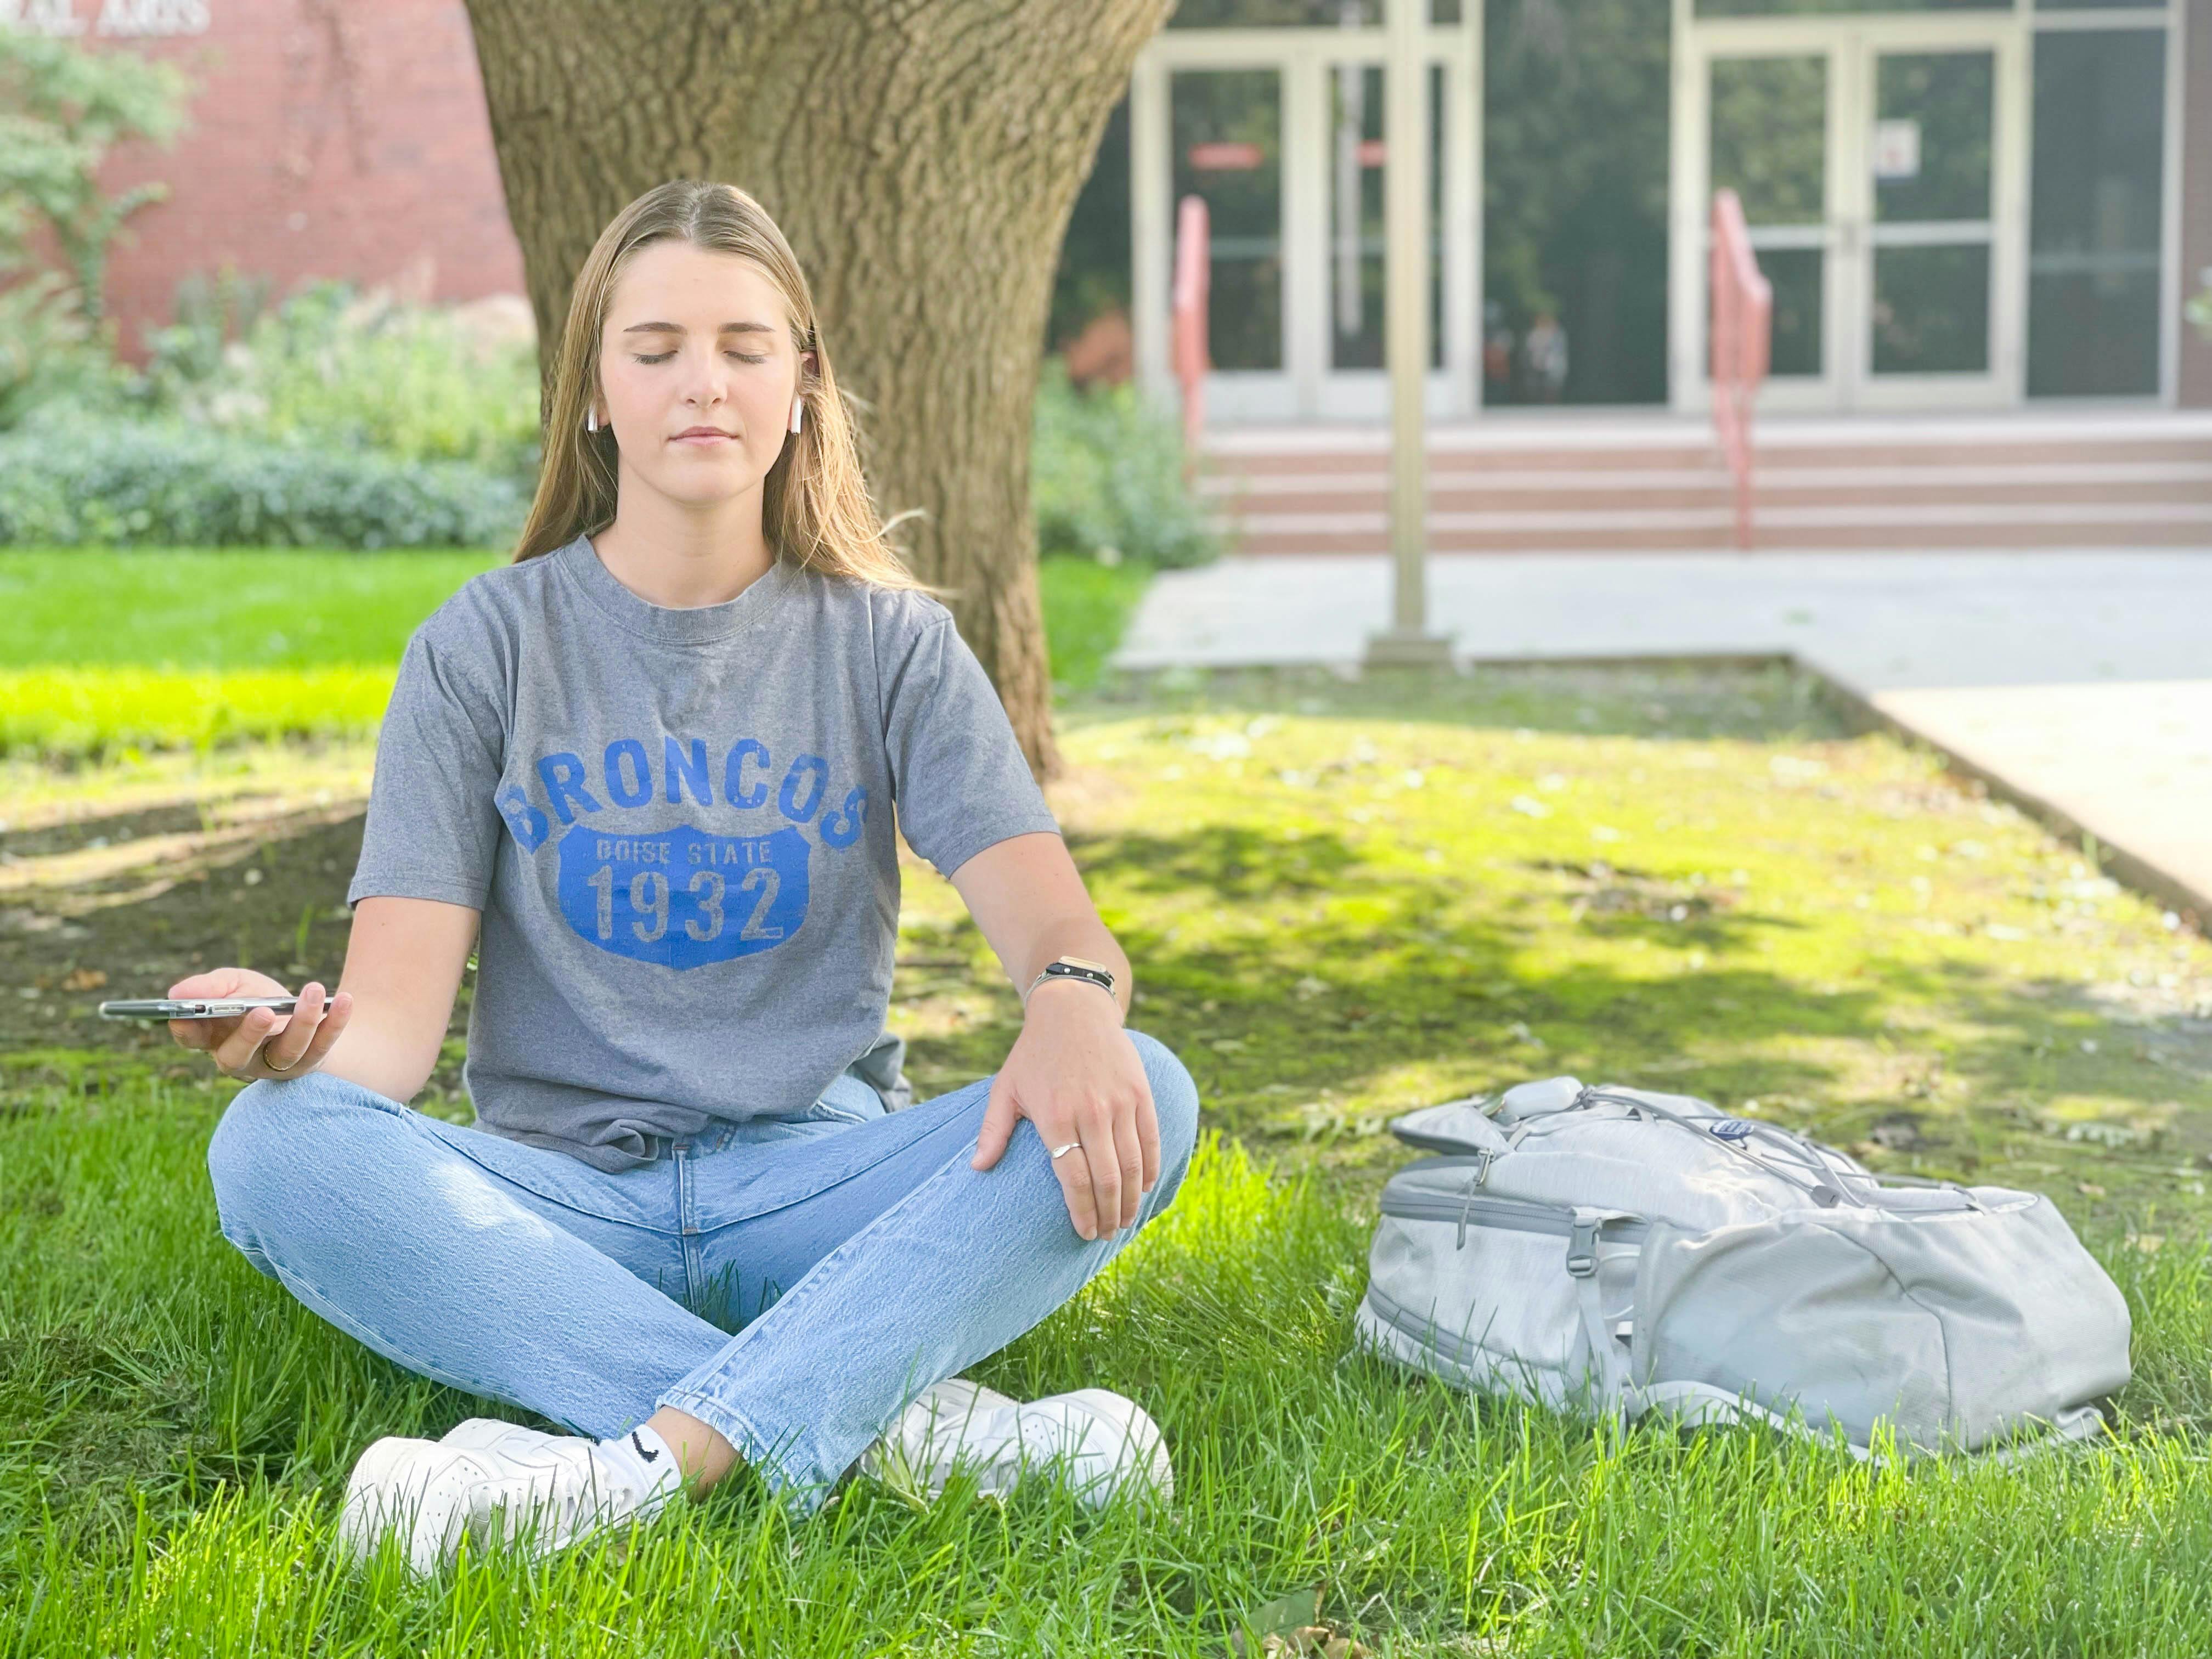 A student with wireless earbuds sitting under a tree, meditating with a phone in her hand.